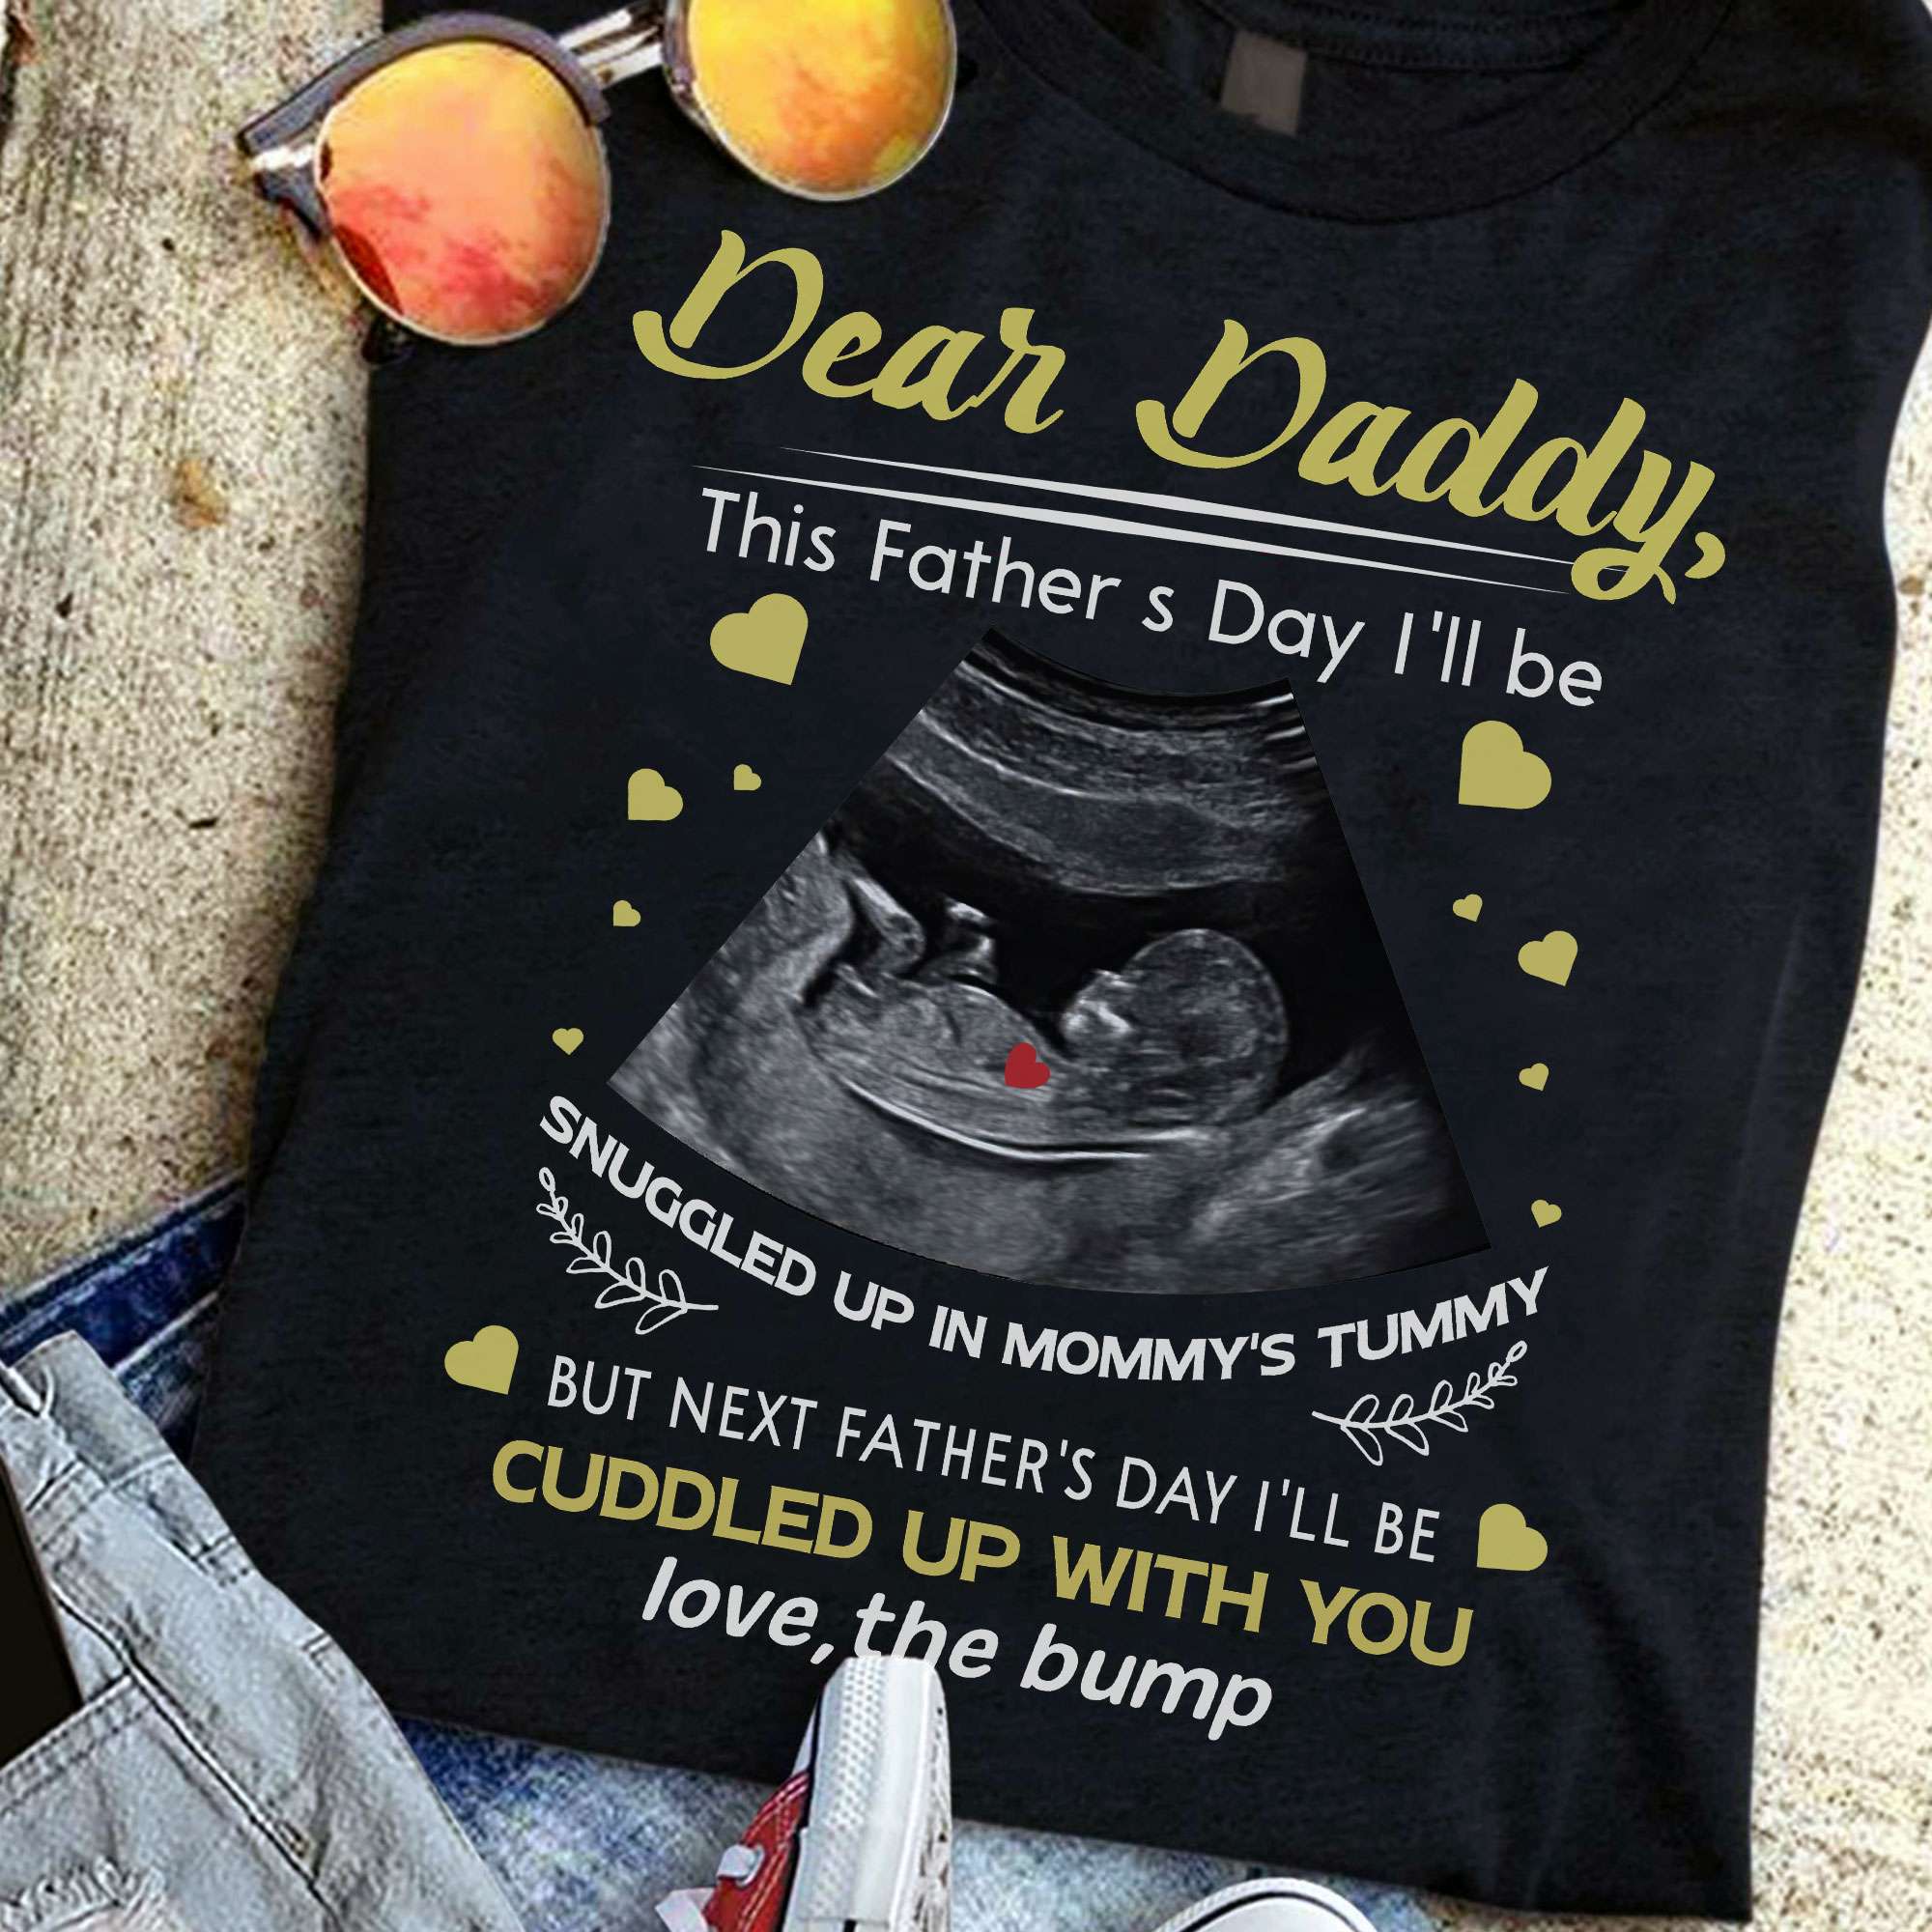 Dear daddy, this father's day I'll be snuggled up in mommy's tummy - Father and kids